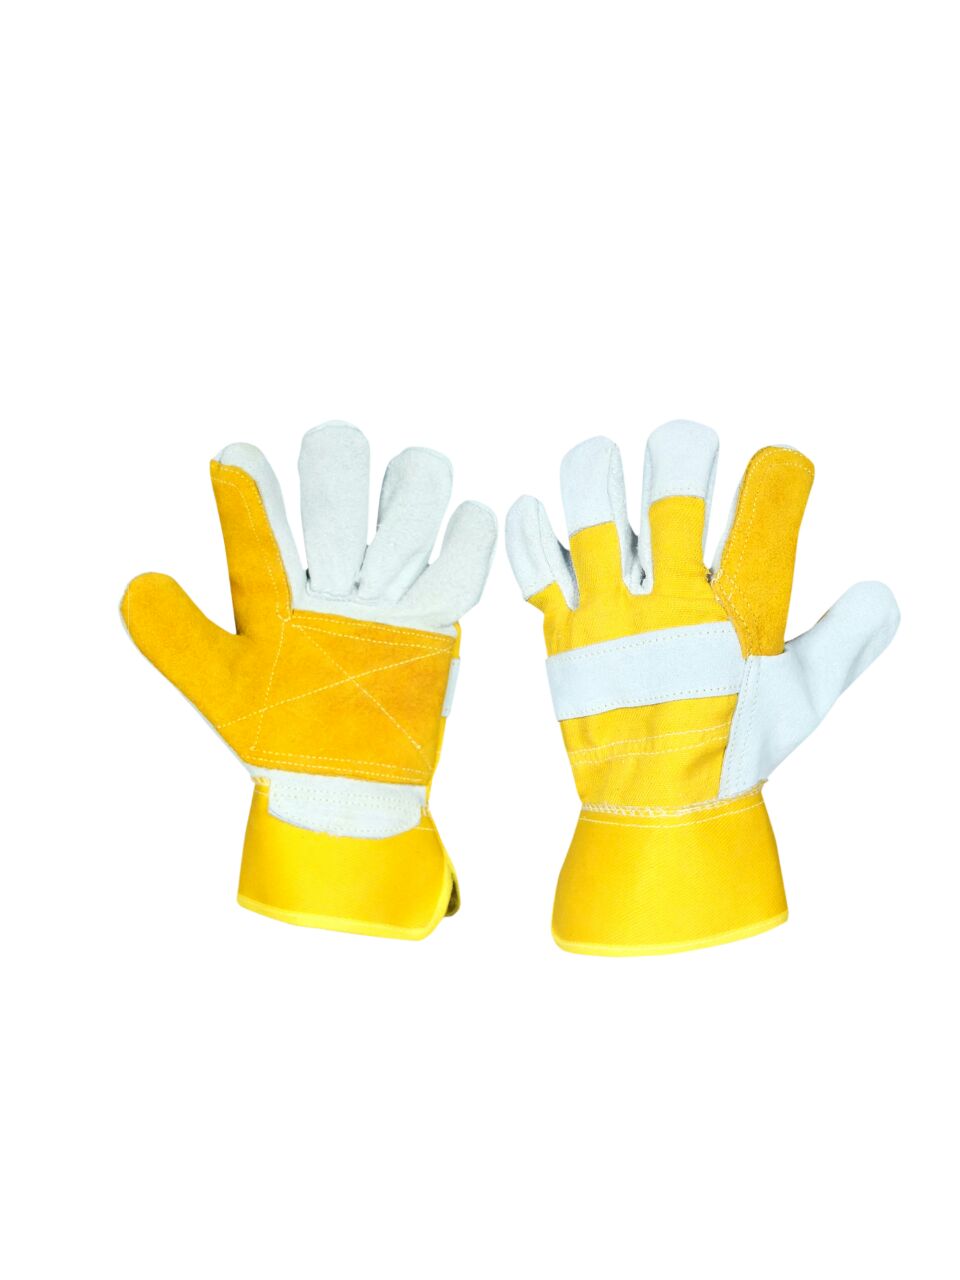 PAIR OF HEAVY DUTY DOUBLE LEATHER PALM LARGE WORK GLOVES 